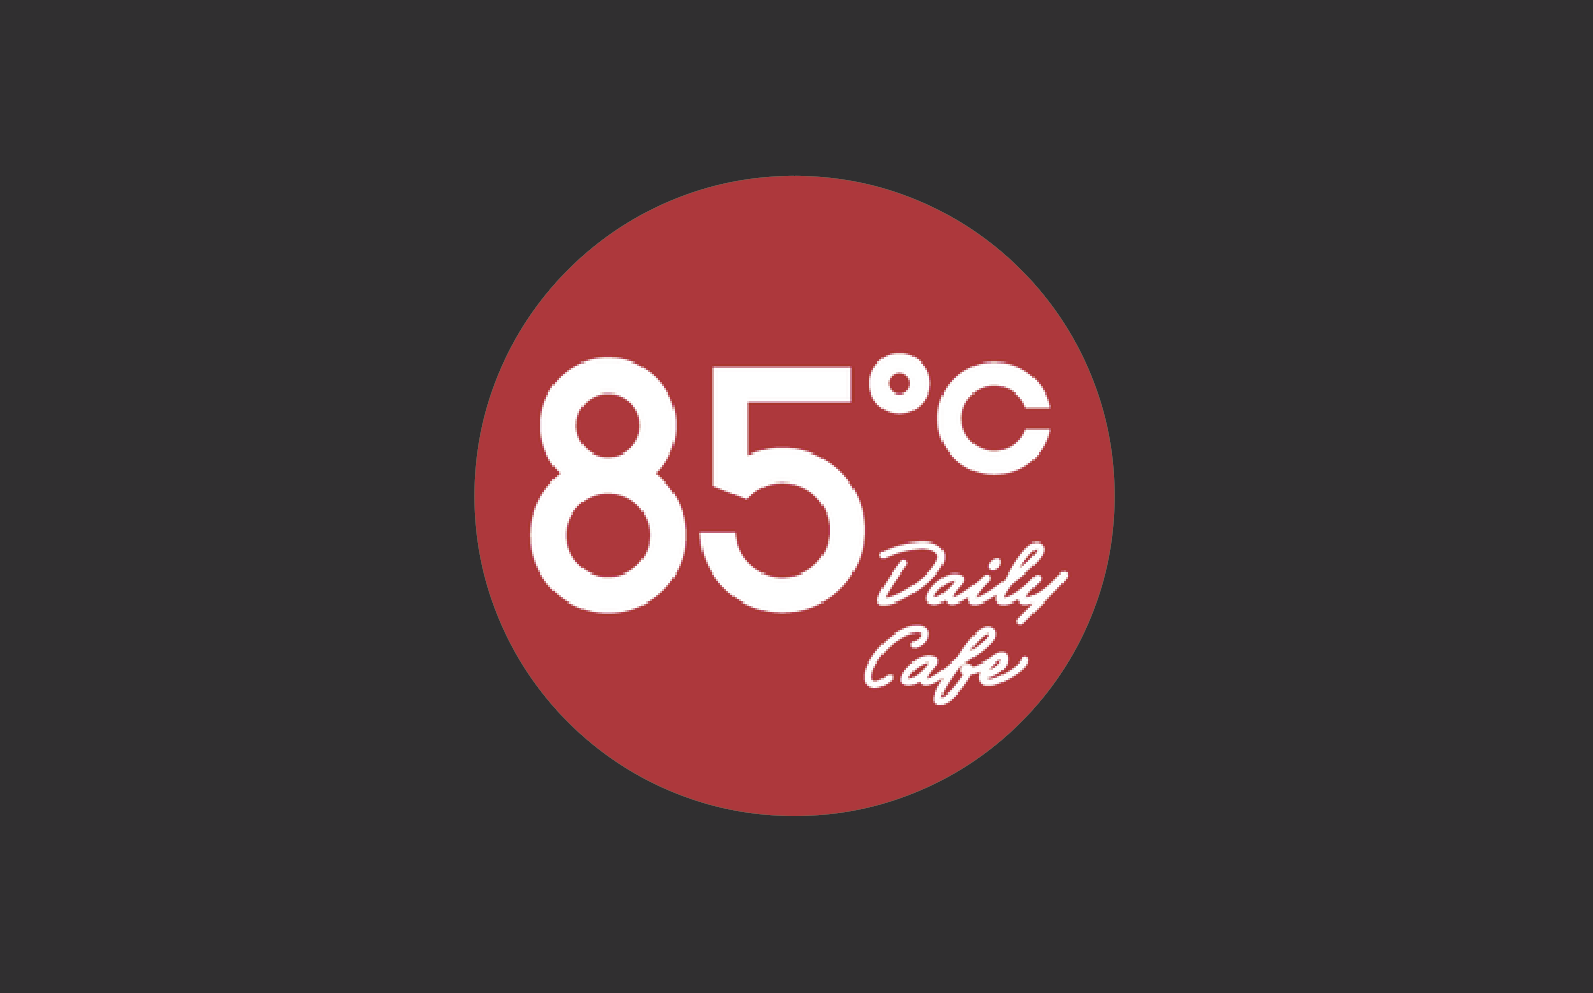 85°C Daily Cafe